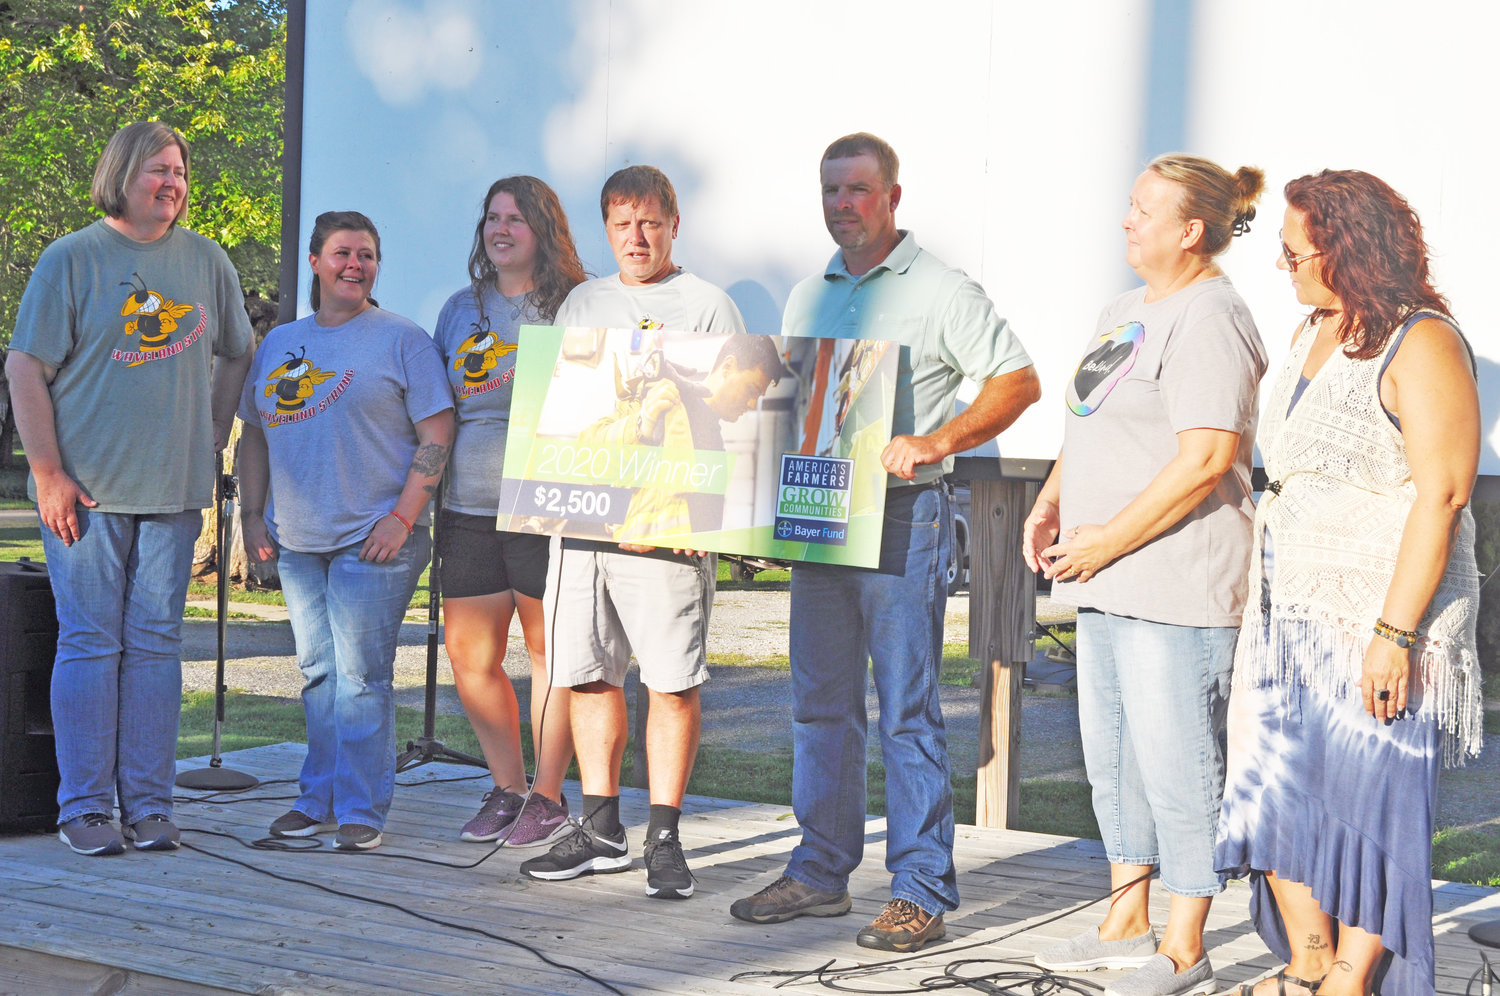 Waveland Strong President Troy Phillips, fourth from left, speaks during a ceremony to accept a $2,500 donation from local resident Darren Simpson, fifth from left, Friday at the Waveland Town Park.